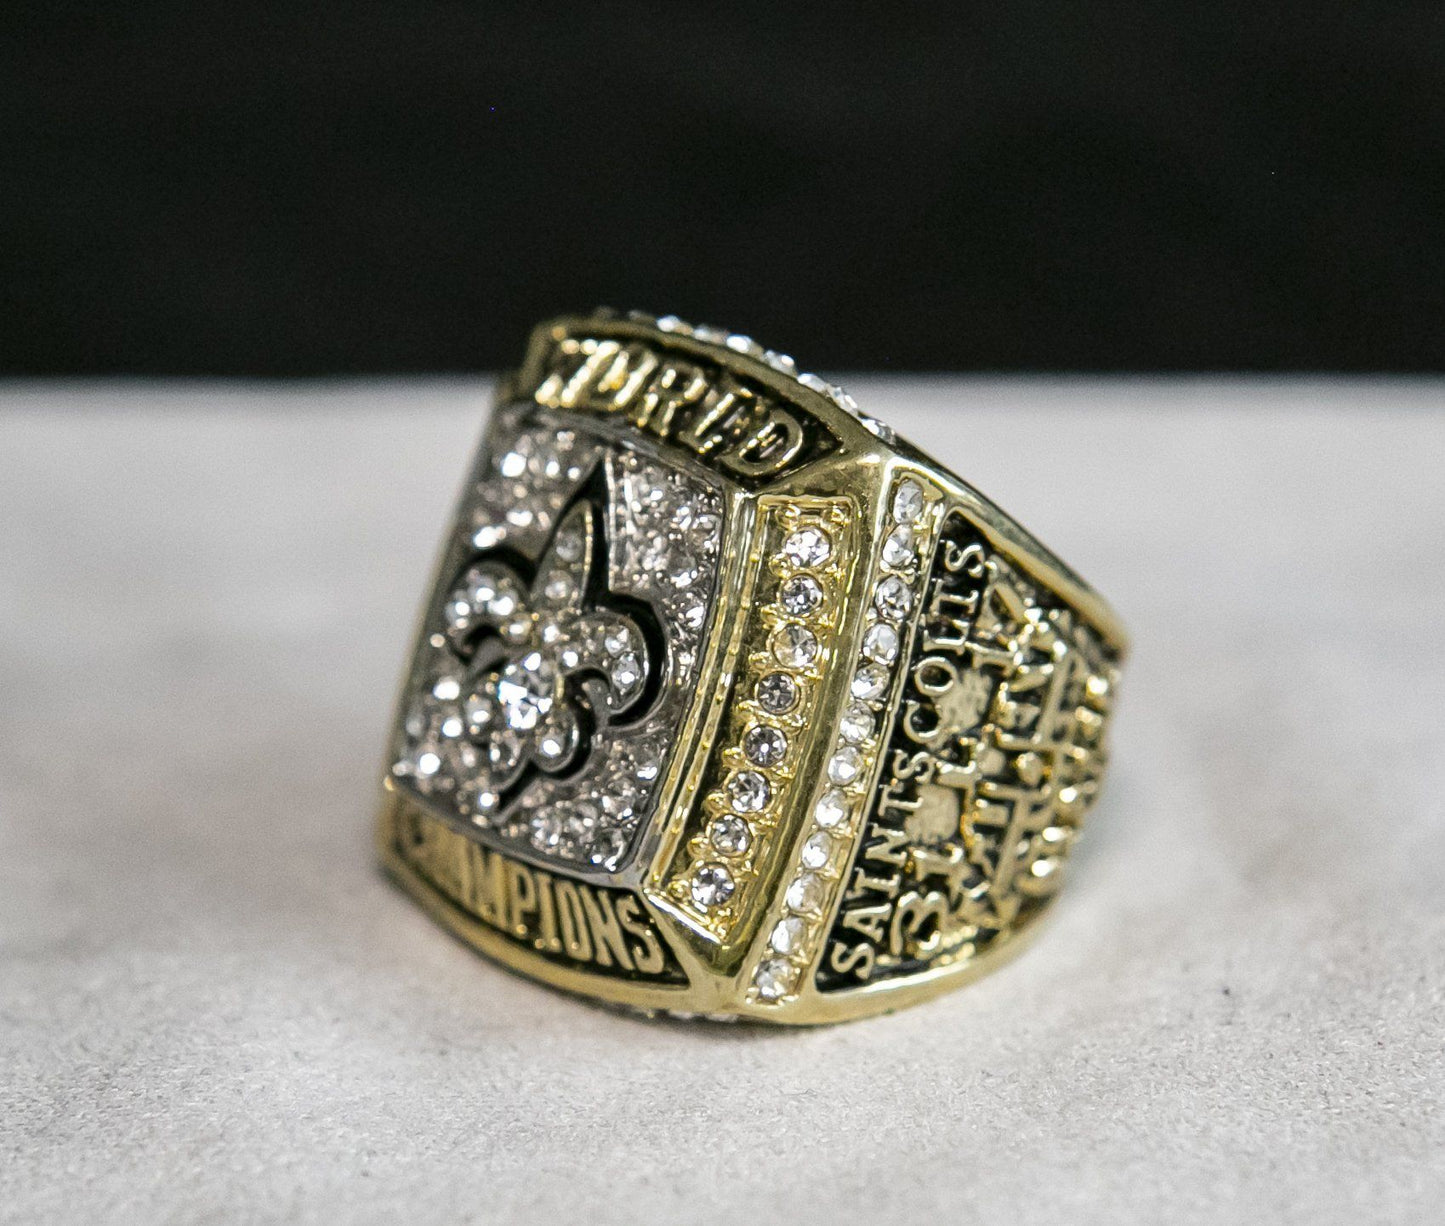 New Orleans Saints Super Bowl Ring (2009) - Rings For Champs, NFL rings, MLB rings, NBA rings, NHL rings, NCAA rings, Super bowl ring, Superbowl ring, Super bowl rings, Superbowl rings, Dallas Cowboys